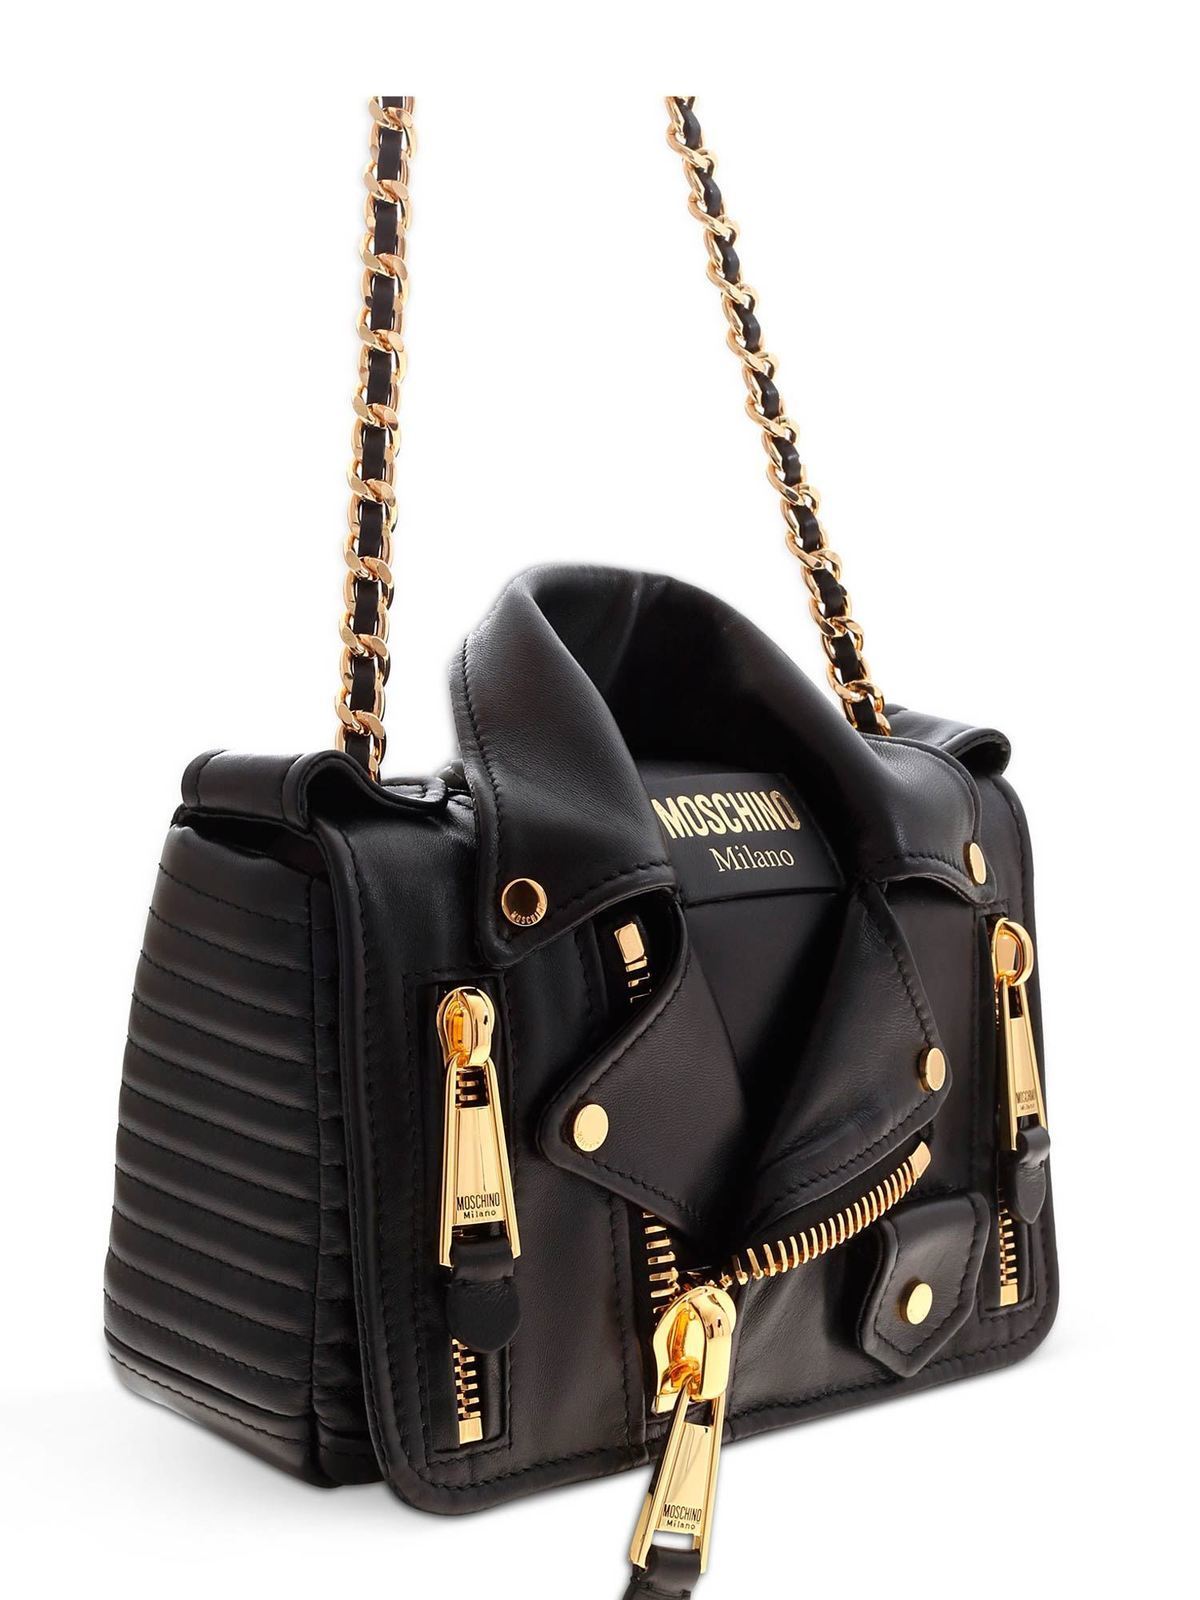 Silence + Noise Buckle Biker Bag | Urban Outfitters